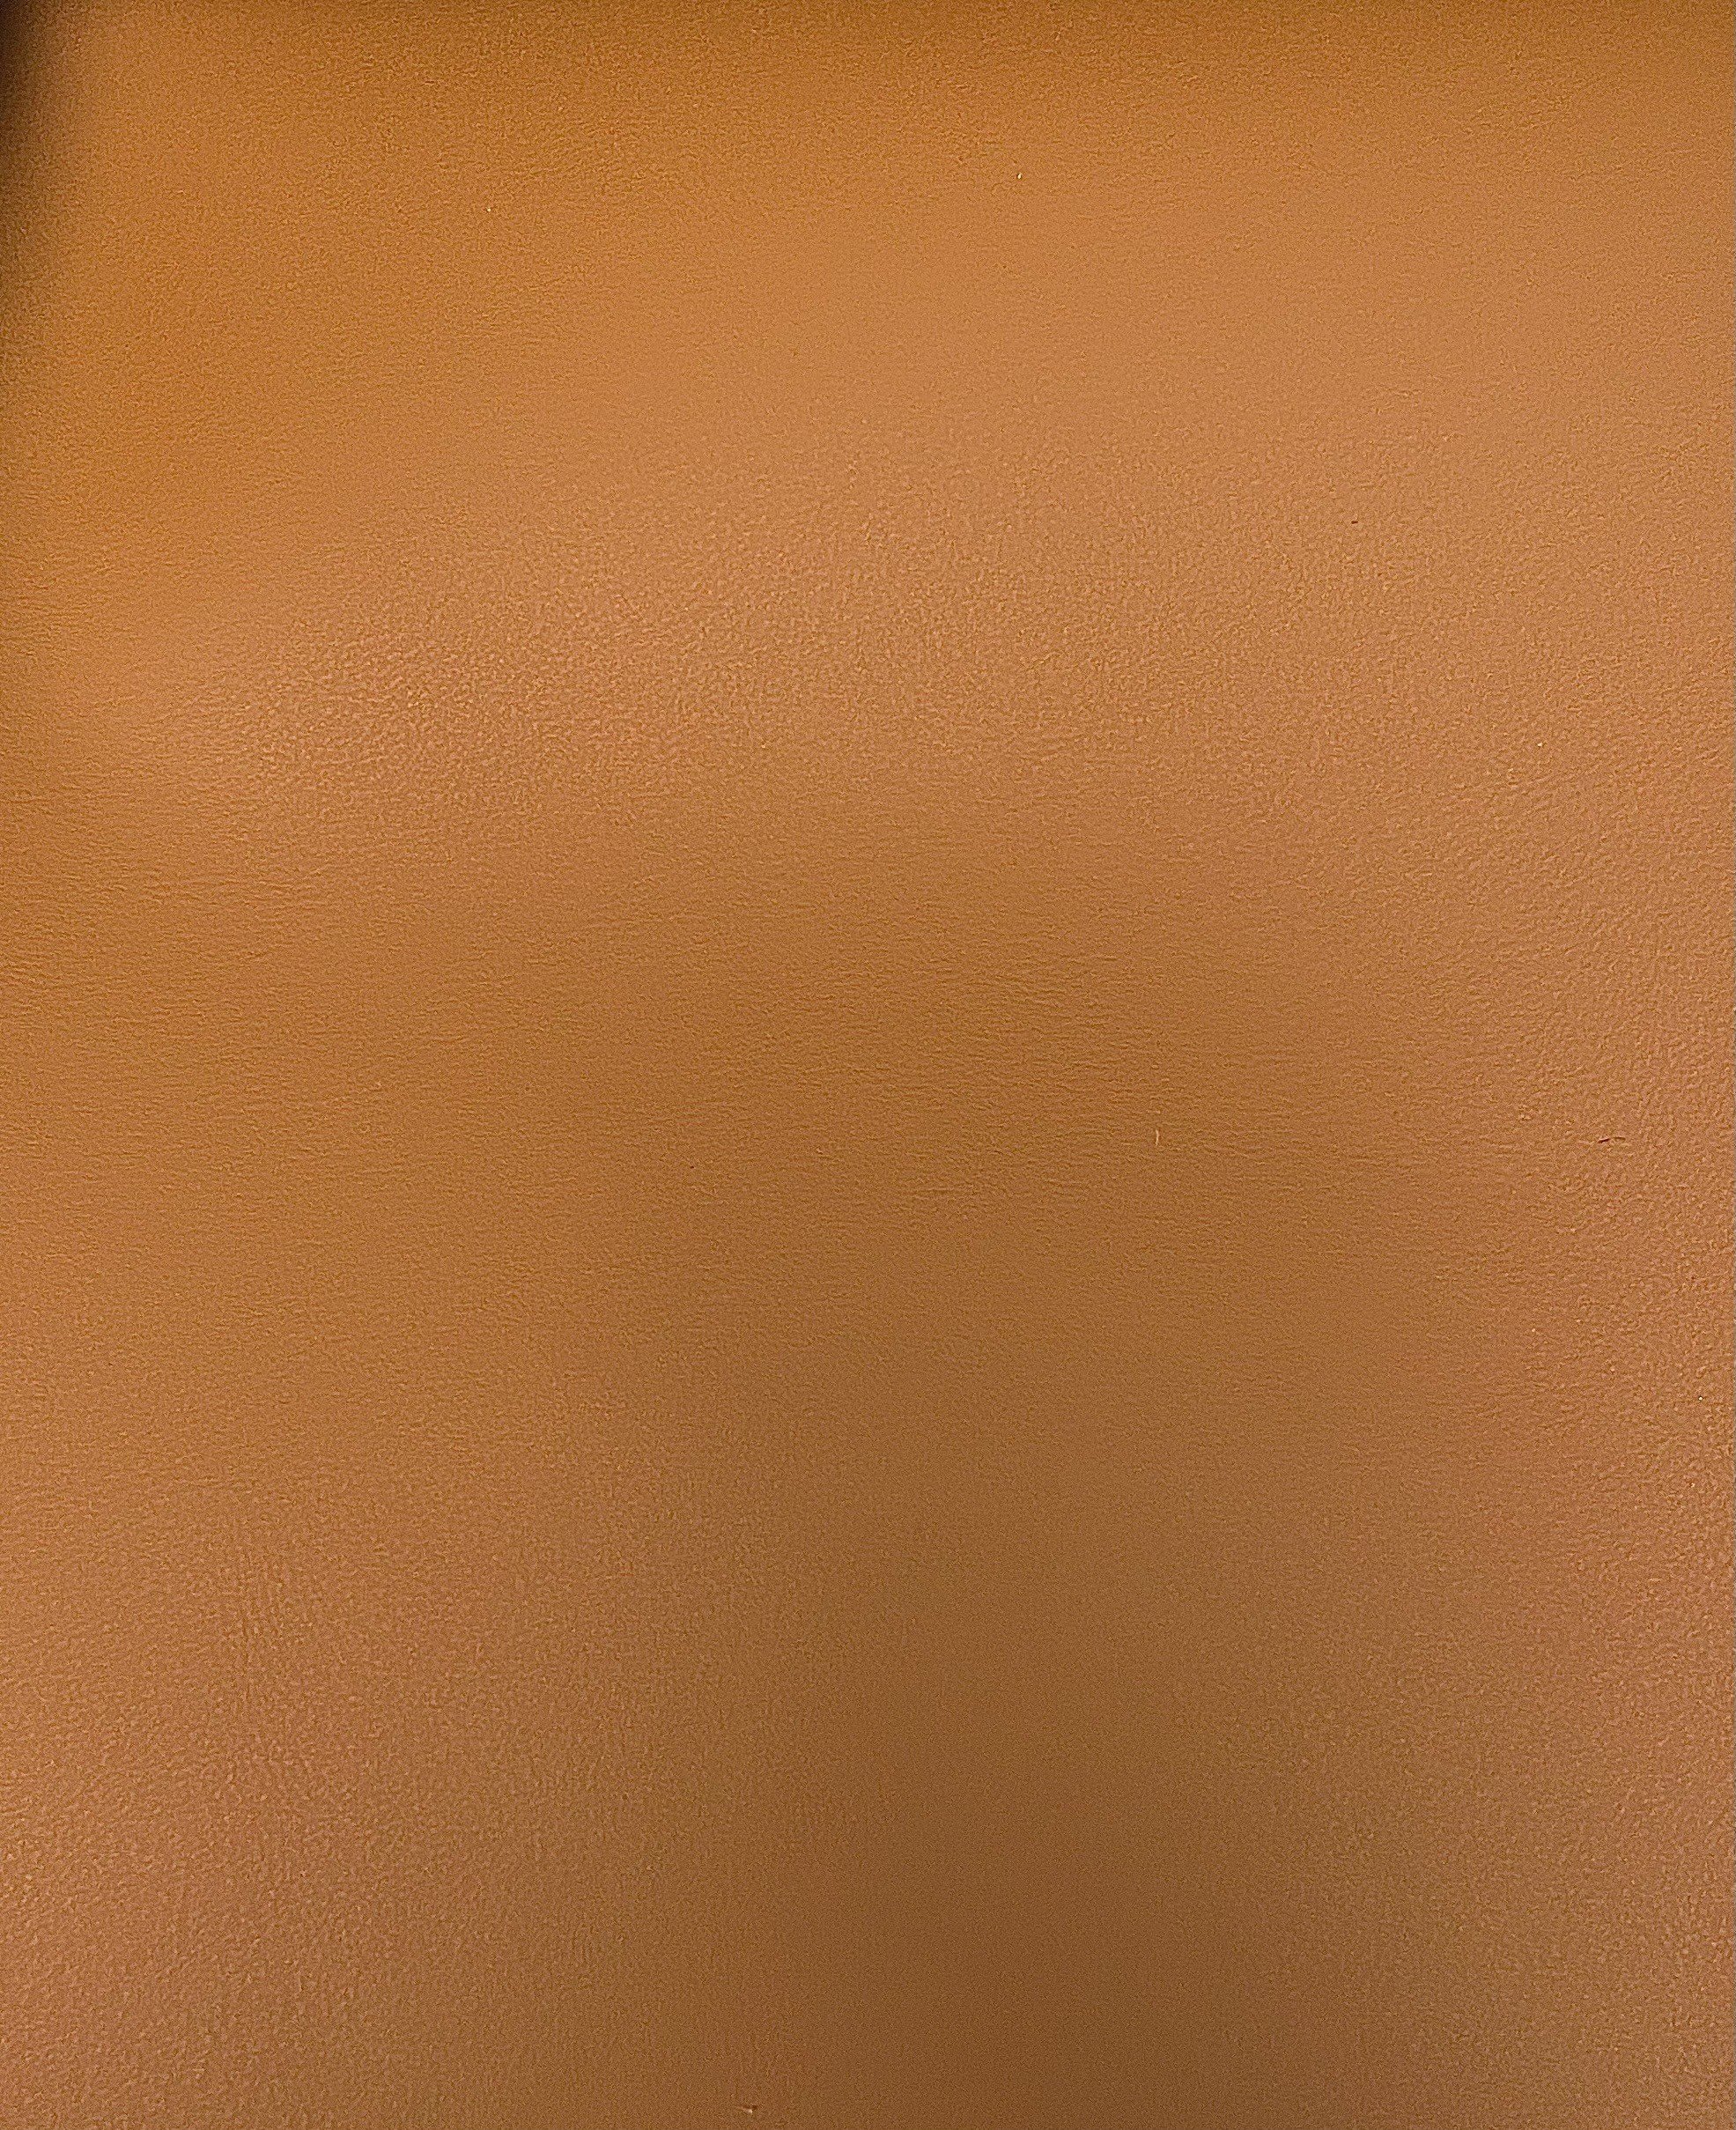 Silicone leather - Cognac - LG2106-16